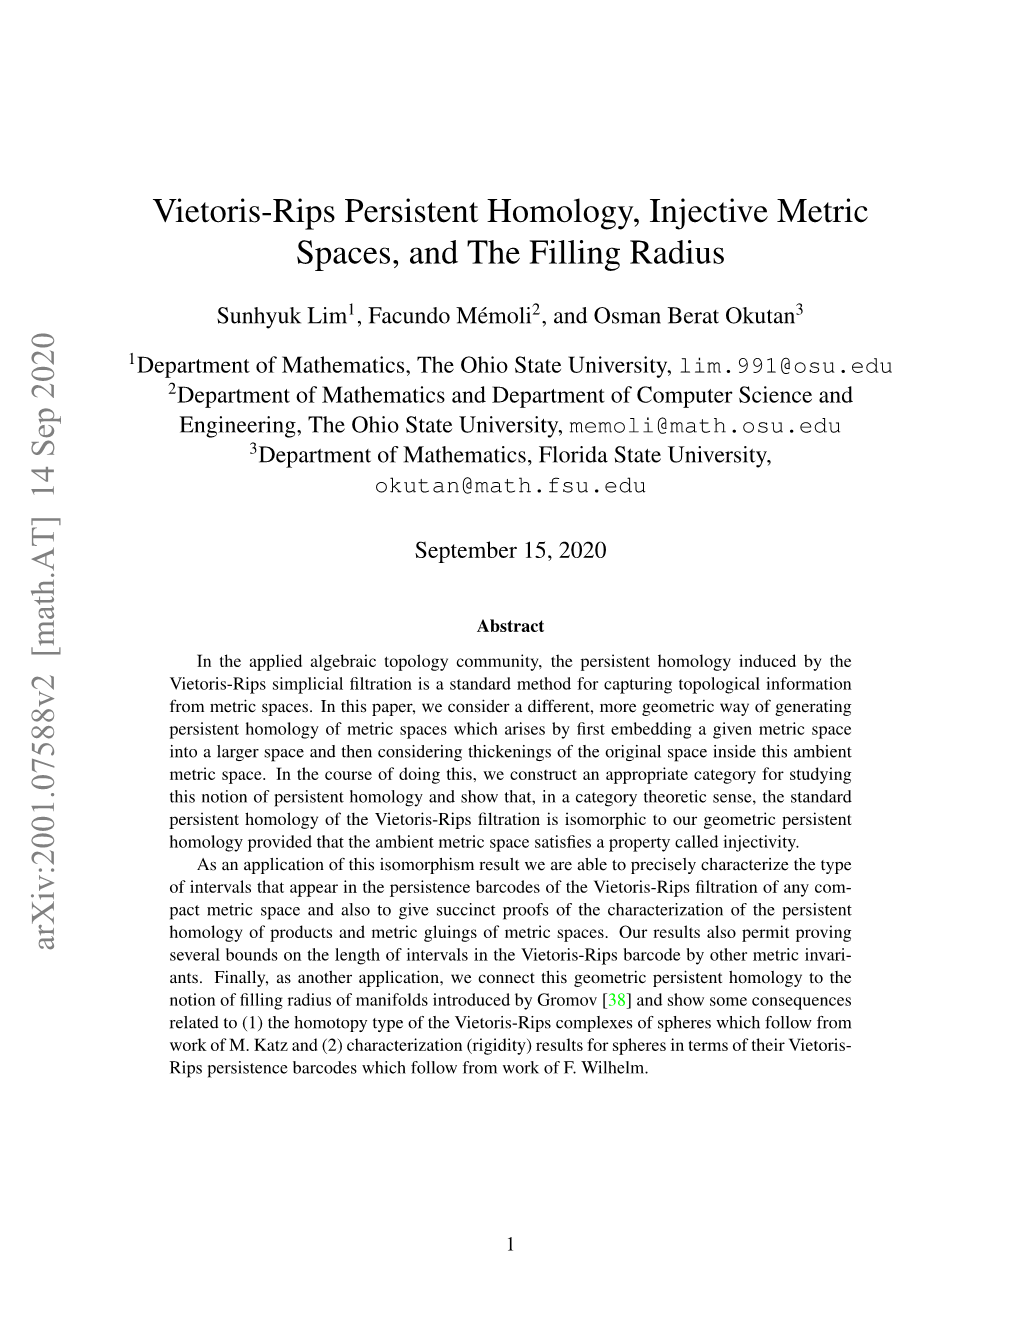 Vietoris-Rips Persistent Homology, Injective Metric Spaces, and the Filling Radius